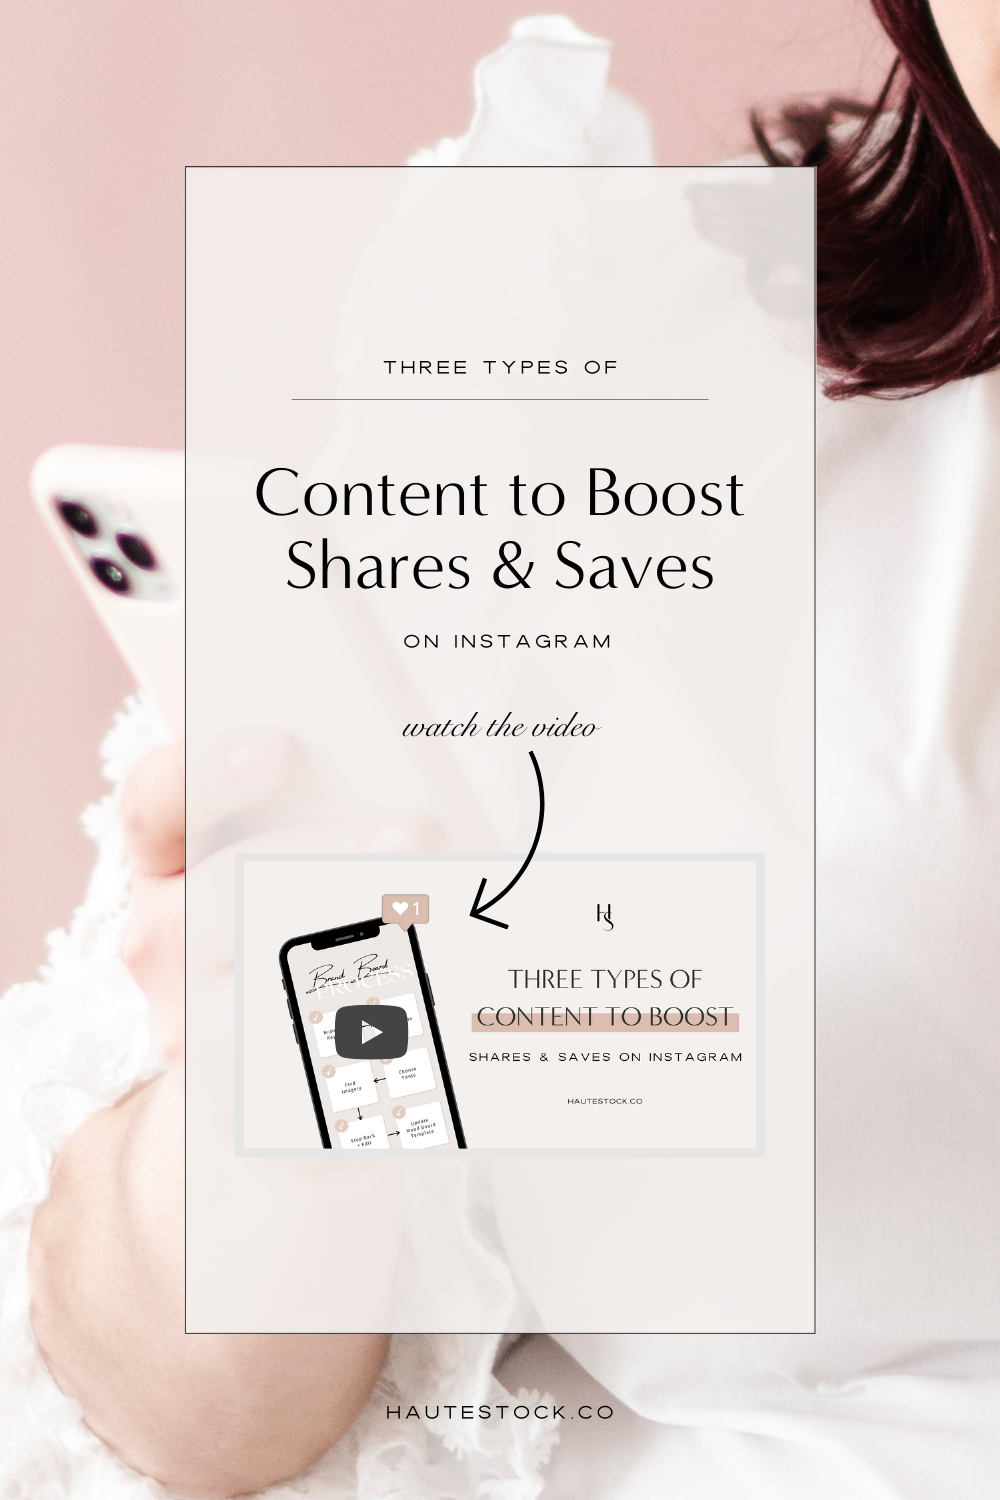 Learn what three types of content you can create for your business' Instagram to help boost shares & saves!